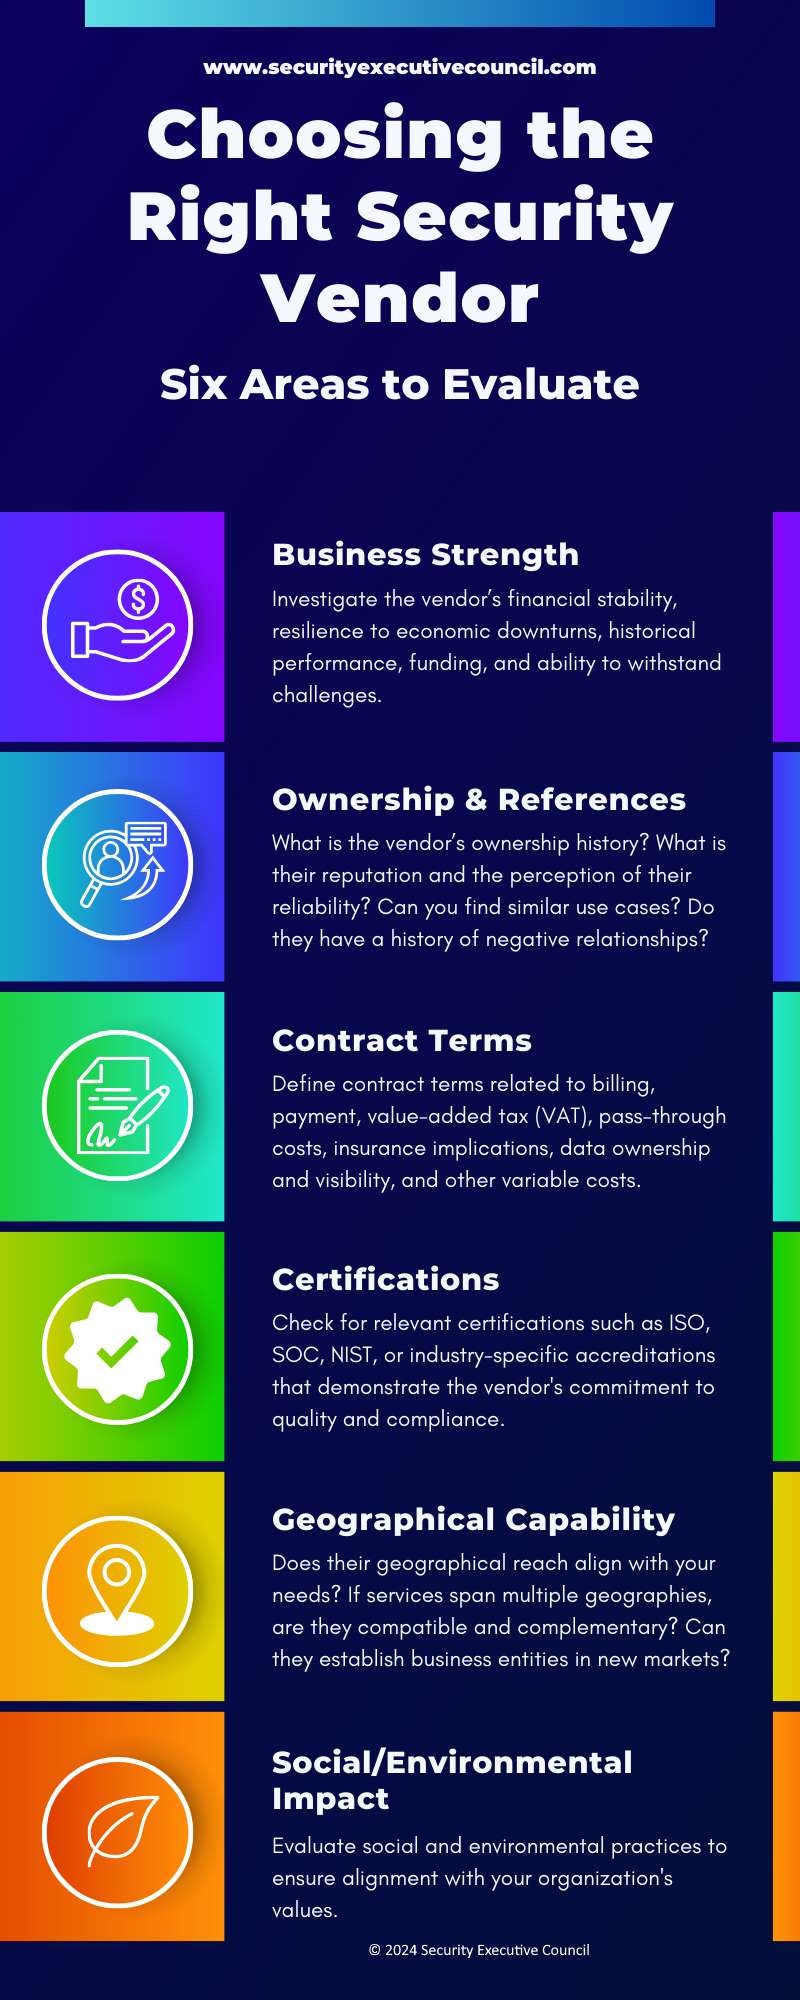 Infographic showing six areas to evaluate when choosing a security vendor. These include Business Strength, Ownership & References, Contract Terms, Certifications, Geographical Capabilities, Social / Environmental Impact